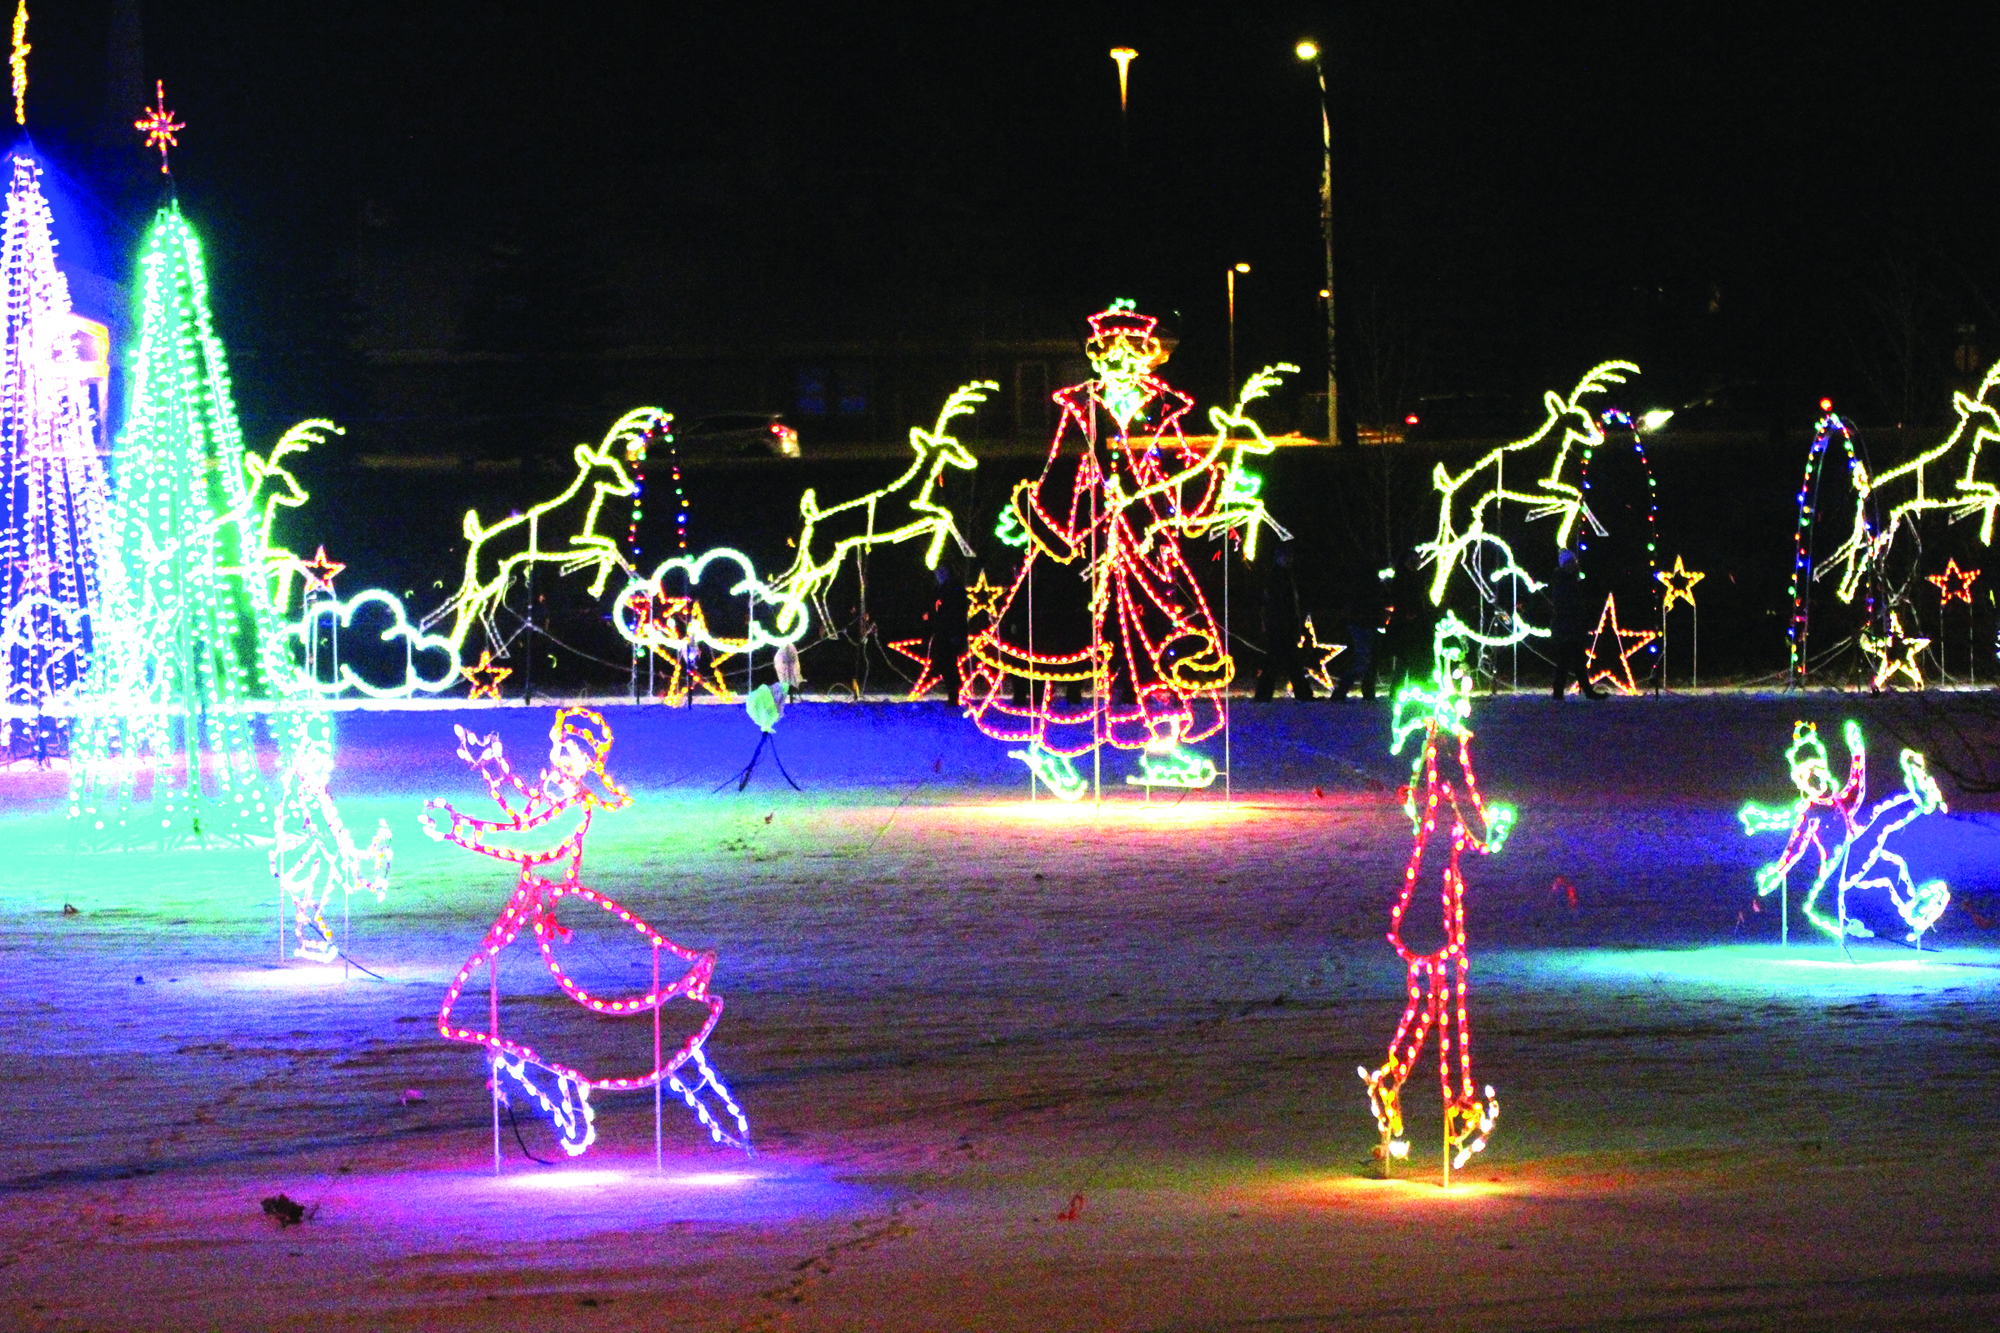 Airdrie's Festival of Lights Lighting Up the Winter Nights